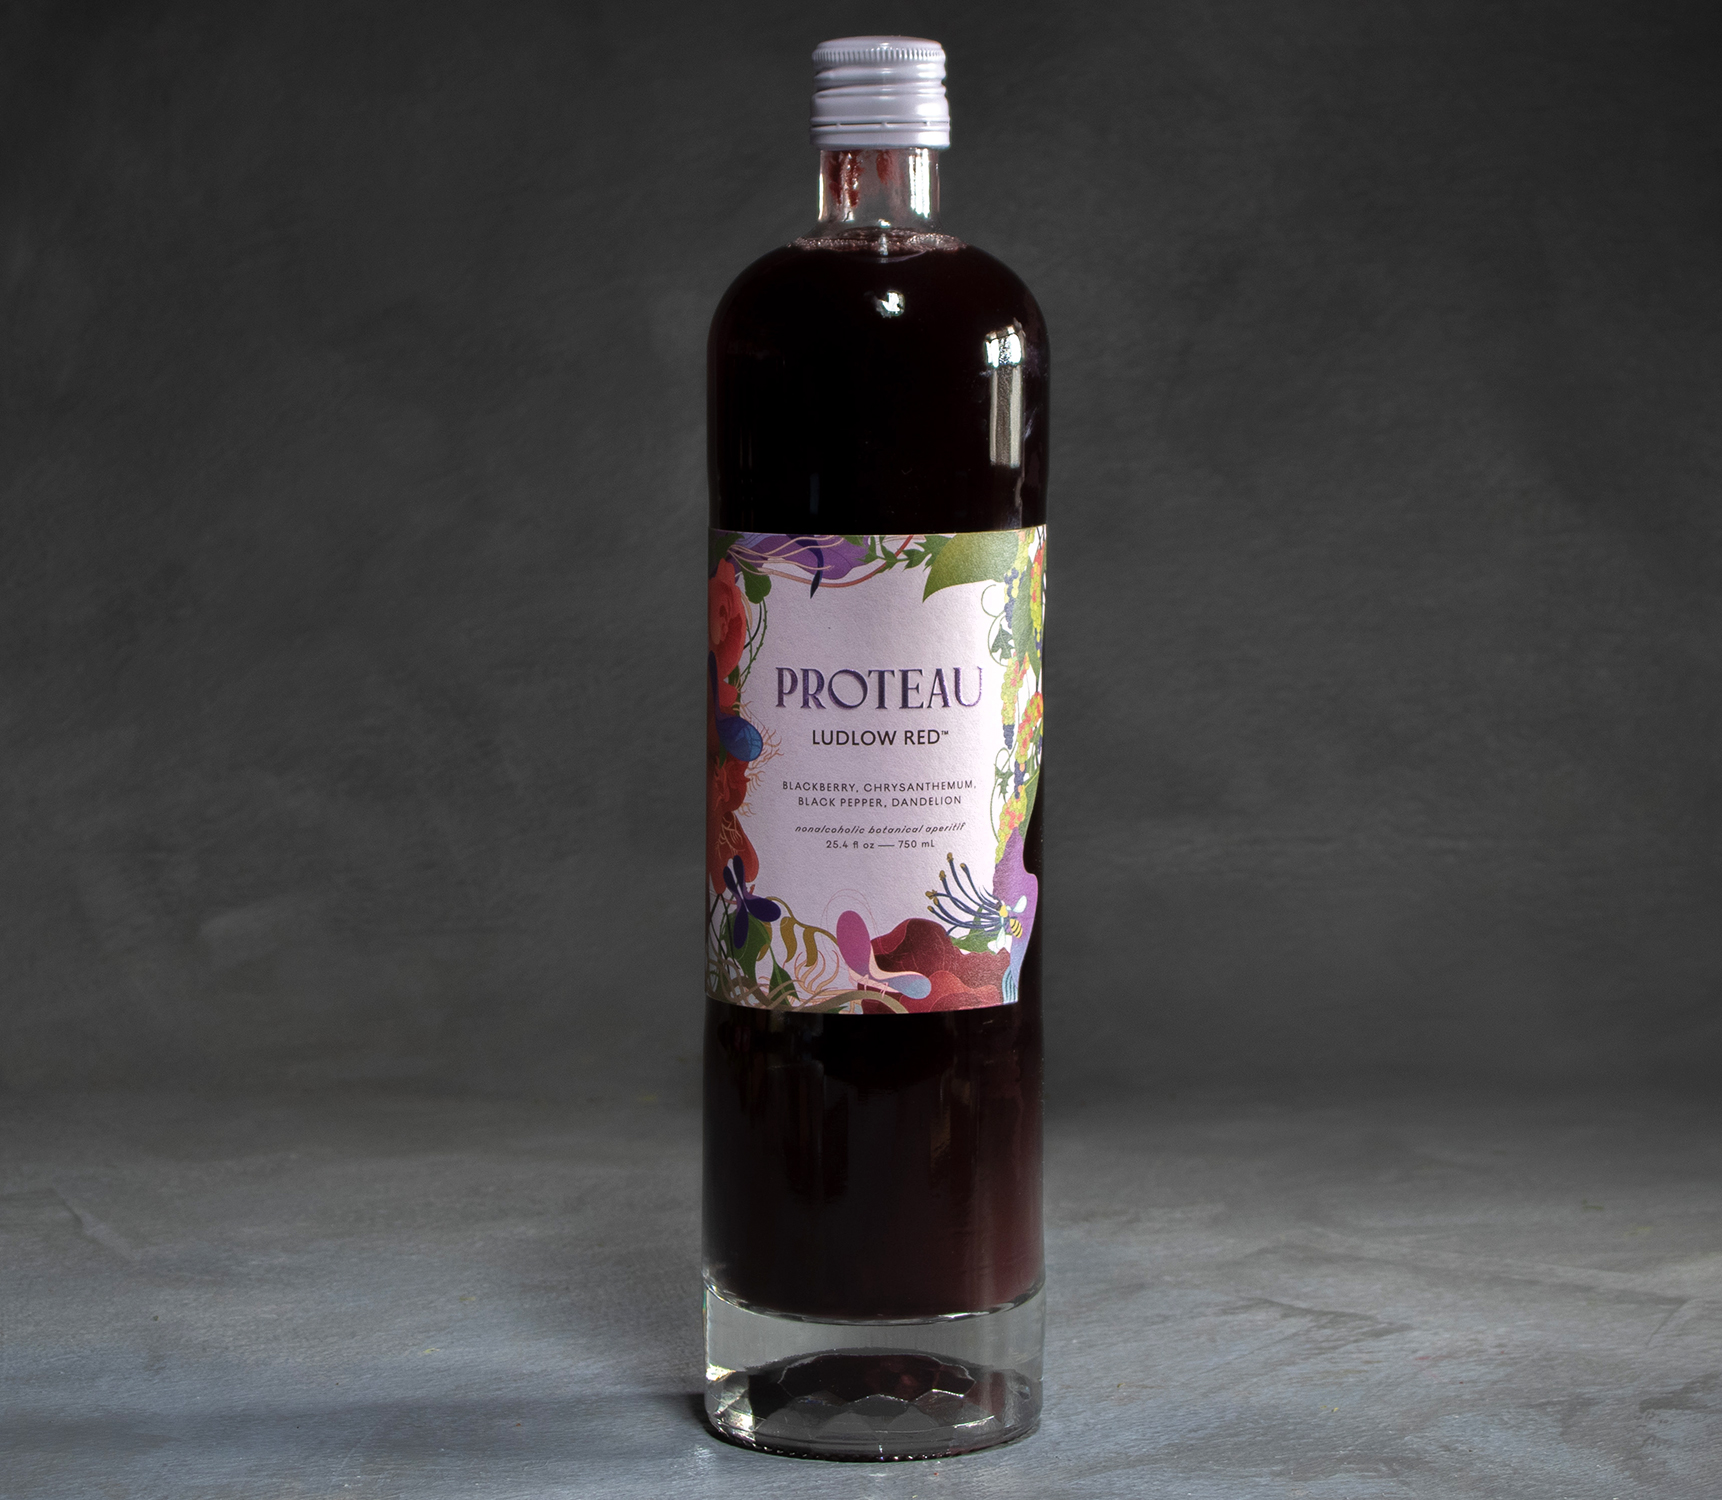 Ludlow Red Aperitif from Proteau $15